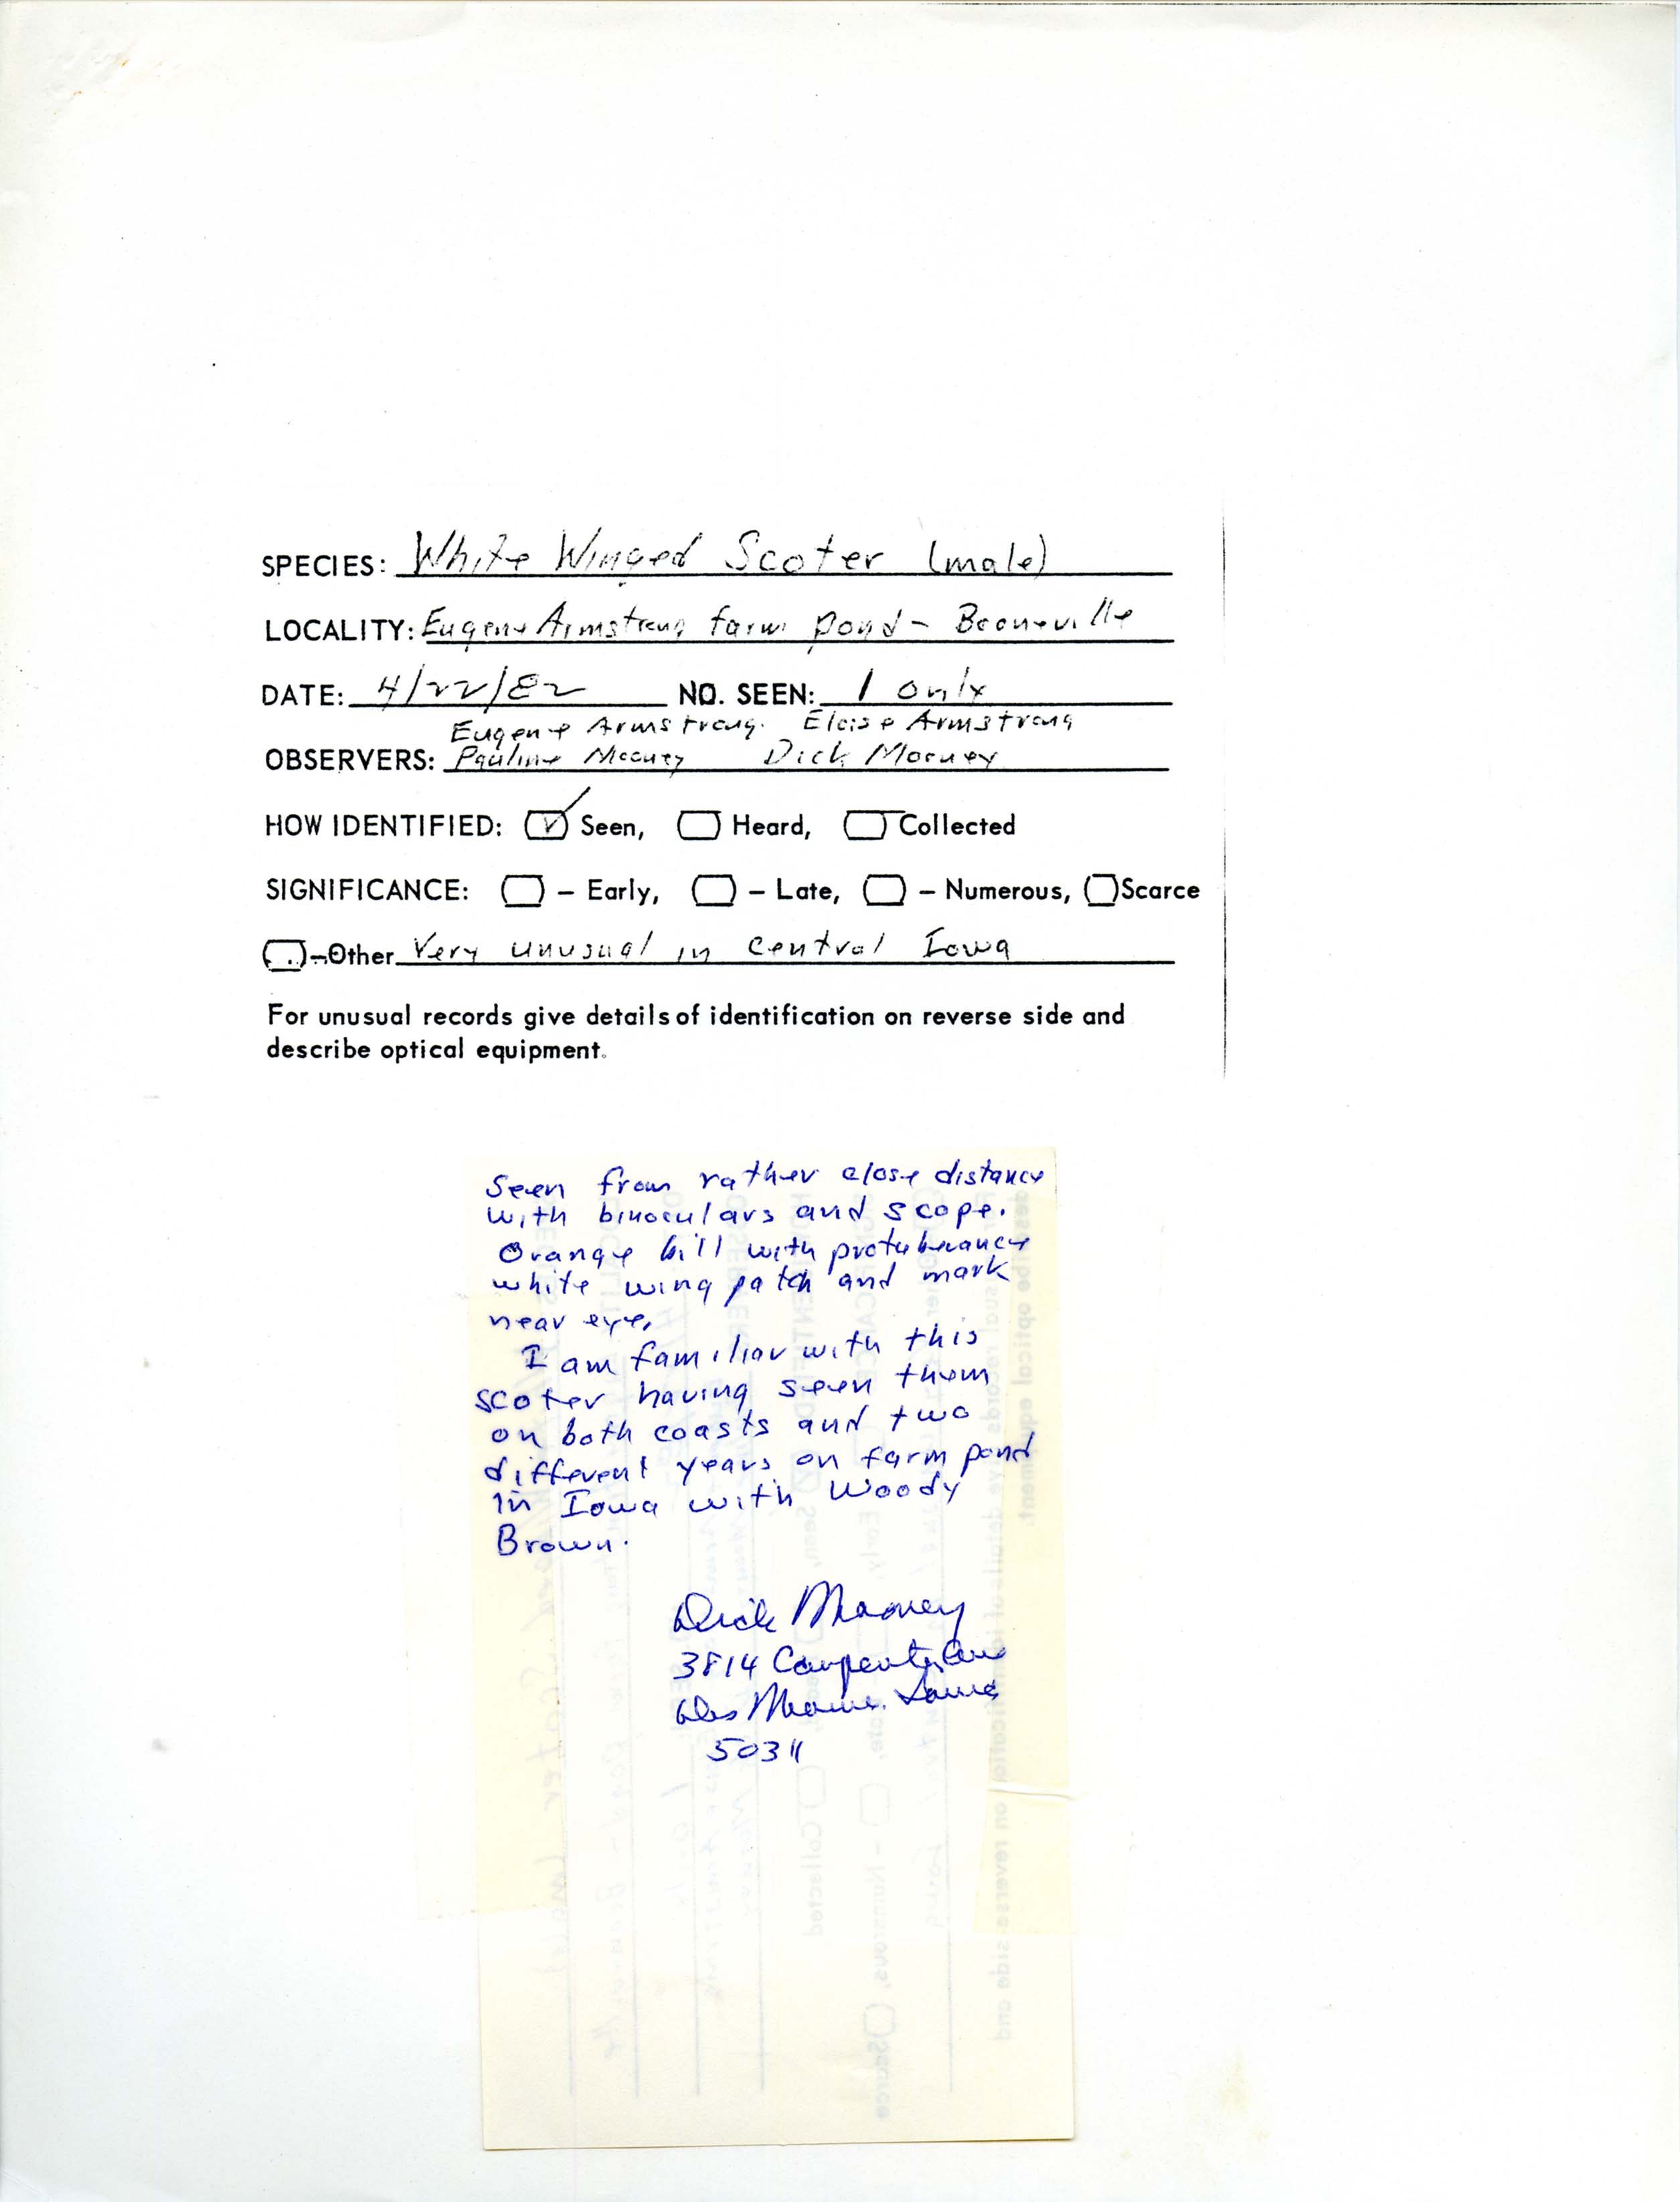 Rare bird documentation form for White-winged Scoter at Booneville in 1982